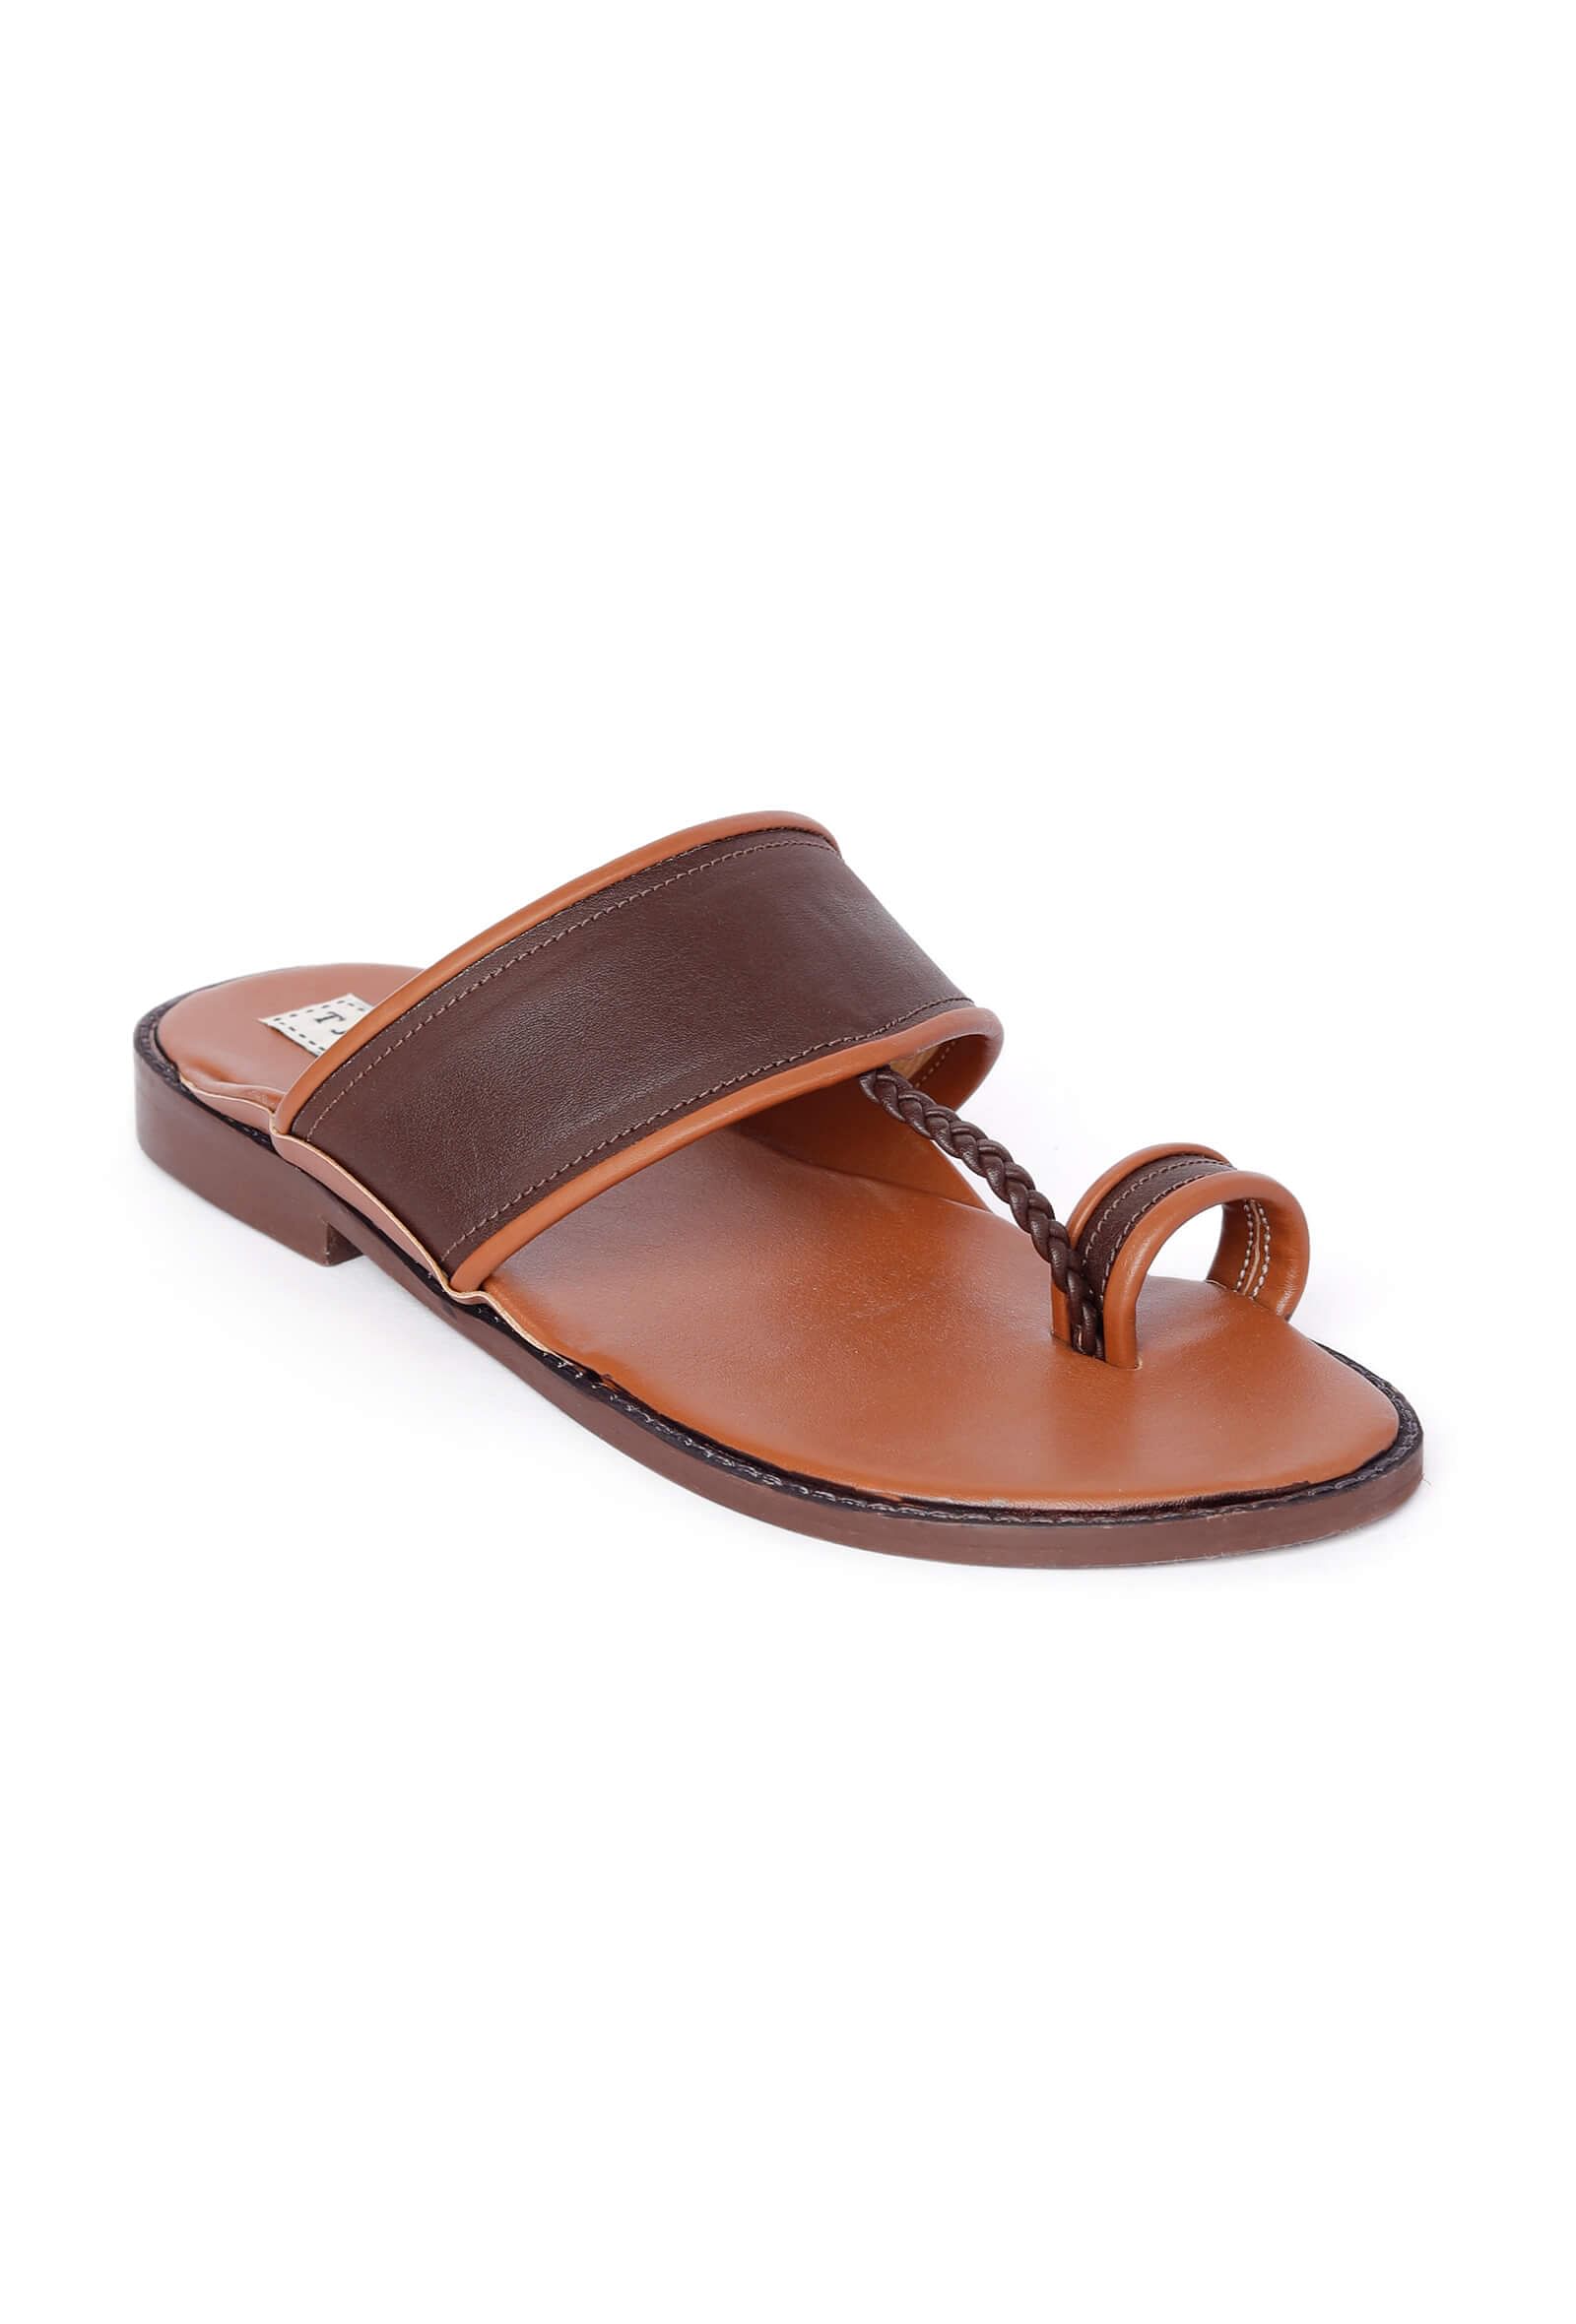 Mocha Contrast Handcrafted Cruelty-Free Leather Kolhapuri Inspired Chappals